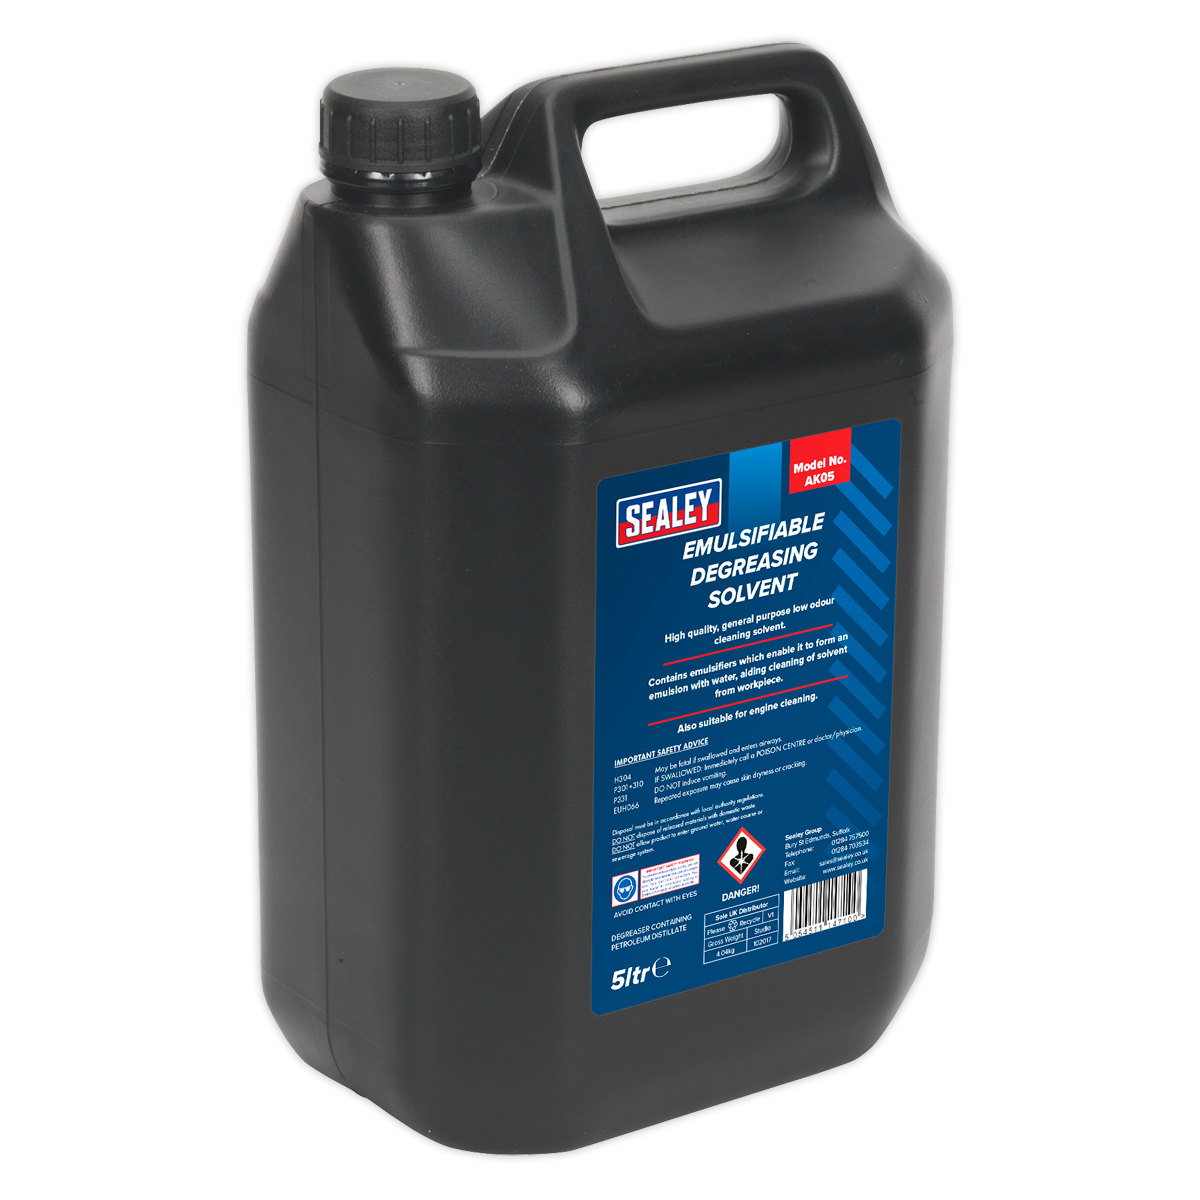 Sealey 5L Emulsifiable Degreasing Solvent AK05